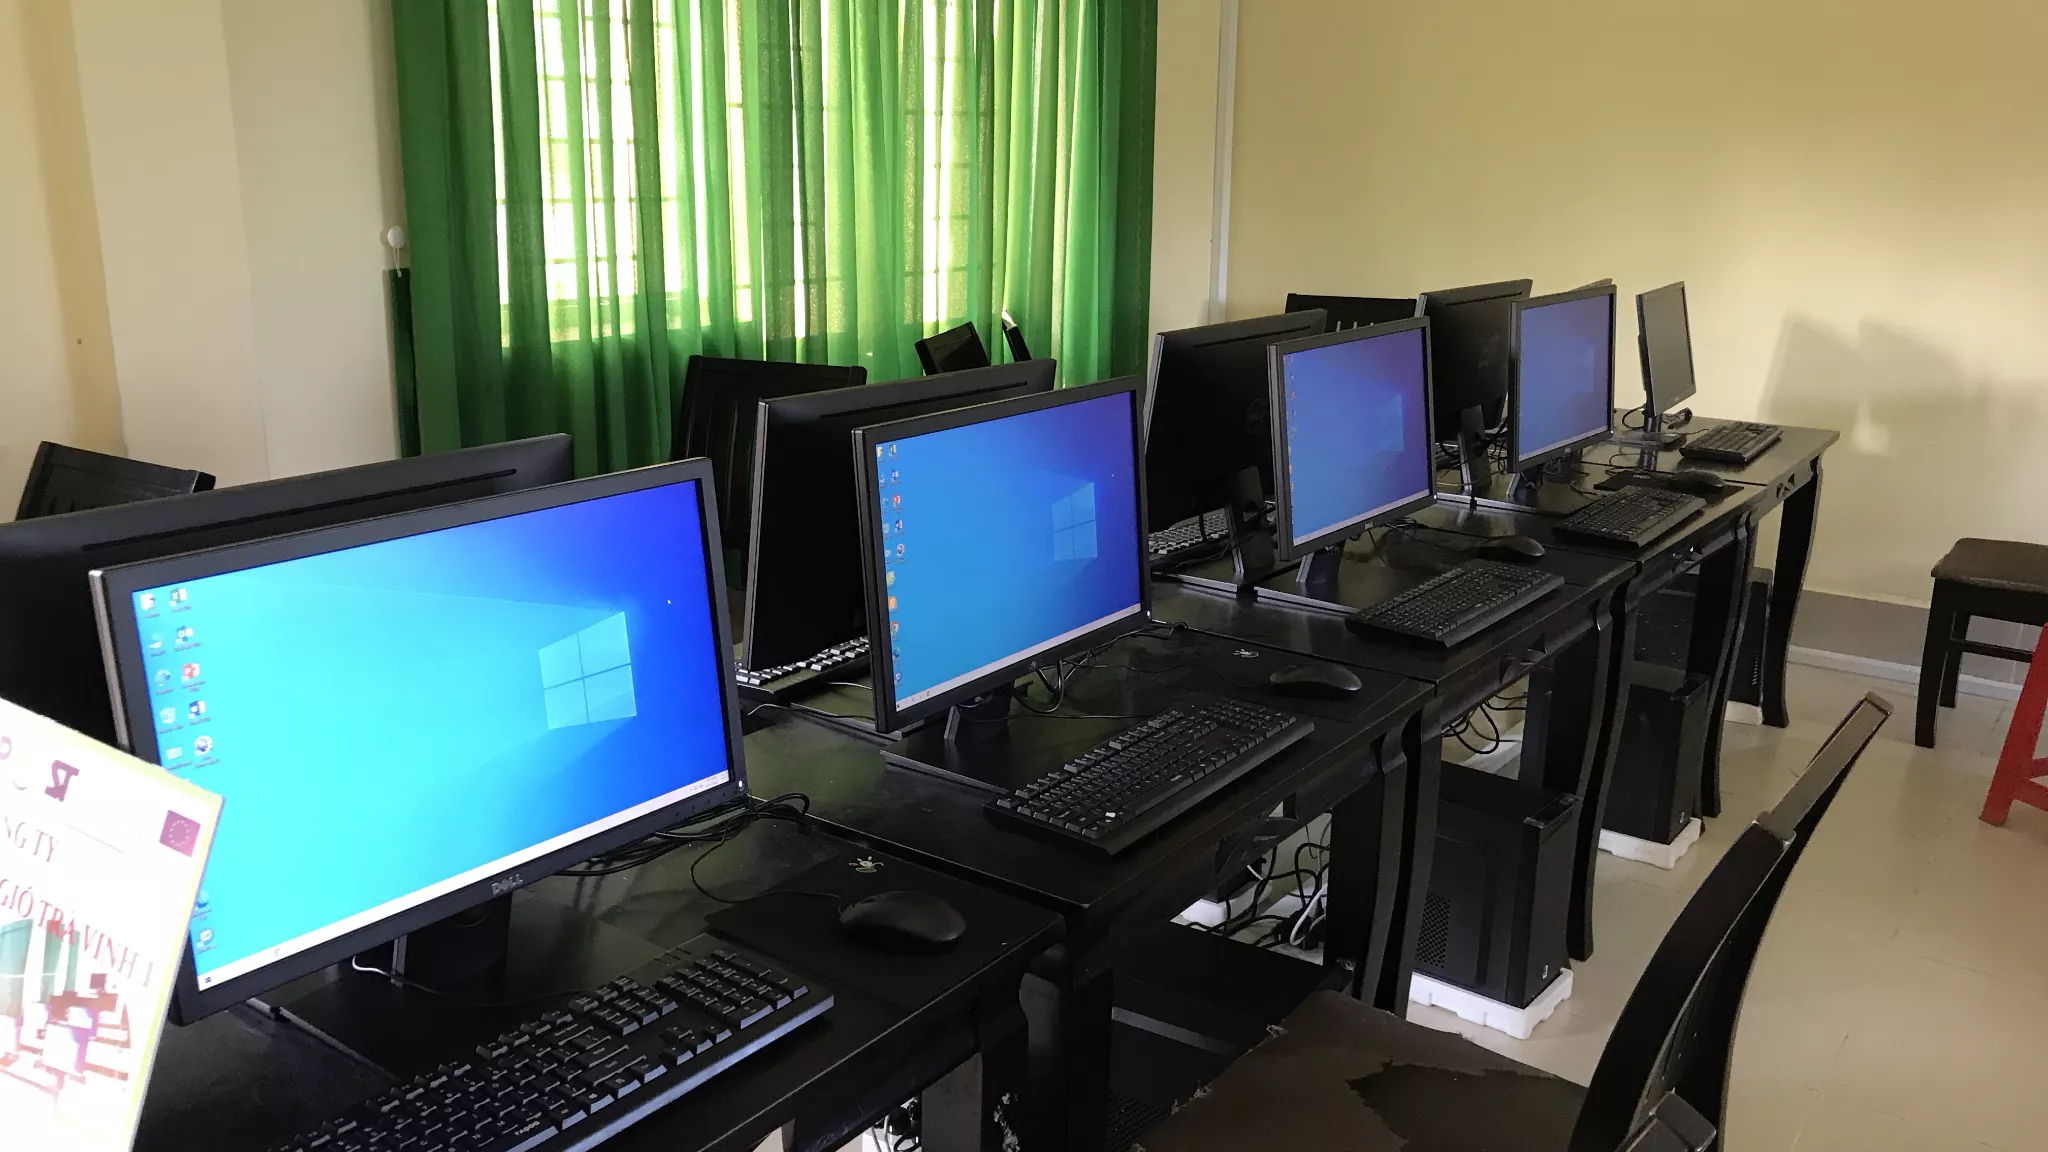 Picture 2: The computers at school (Photo courtesy of TWPC)